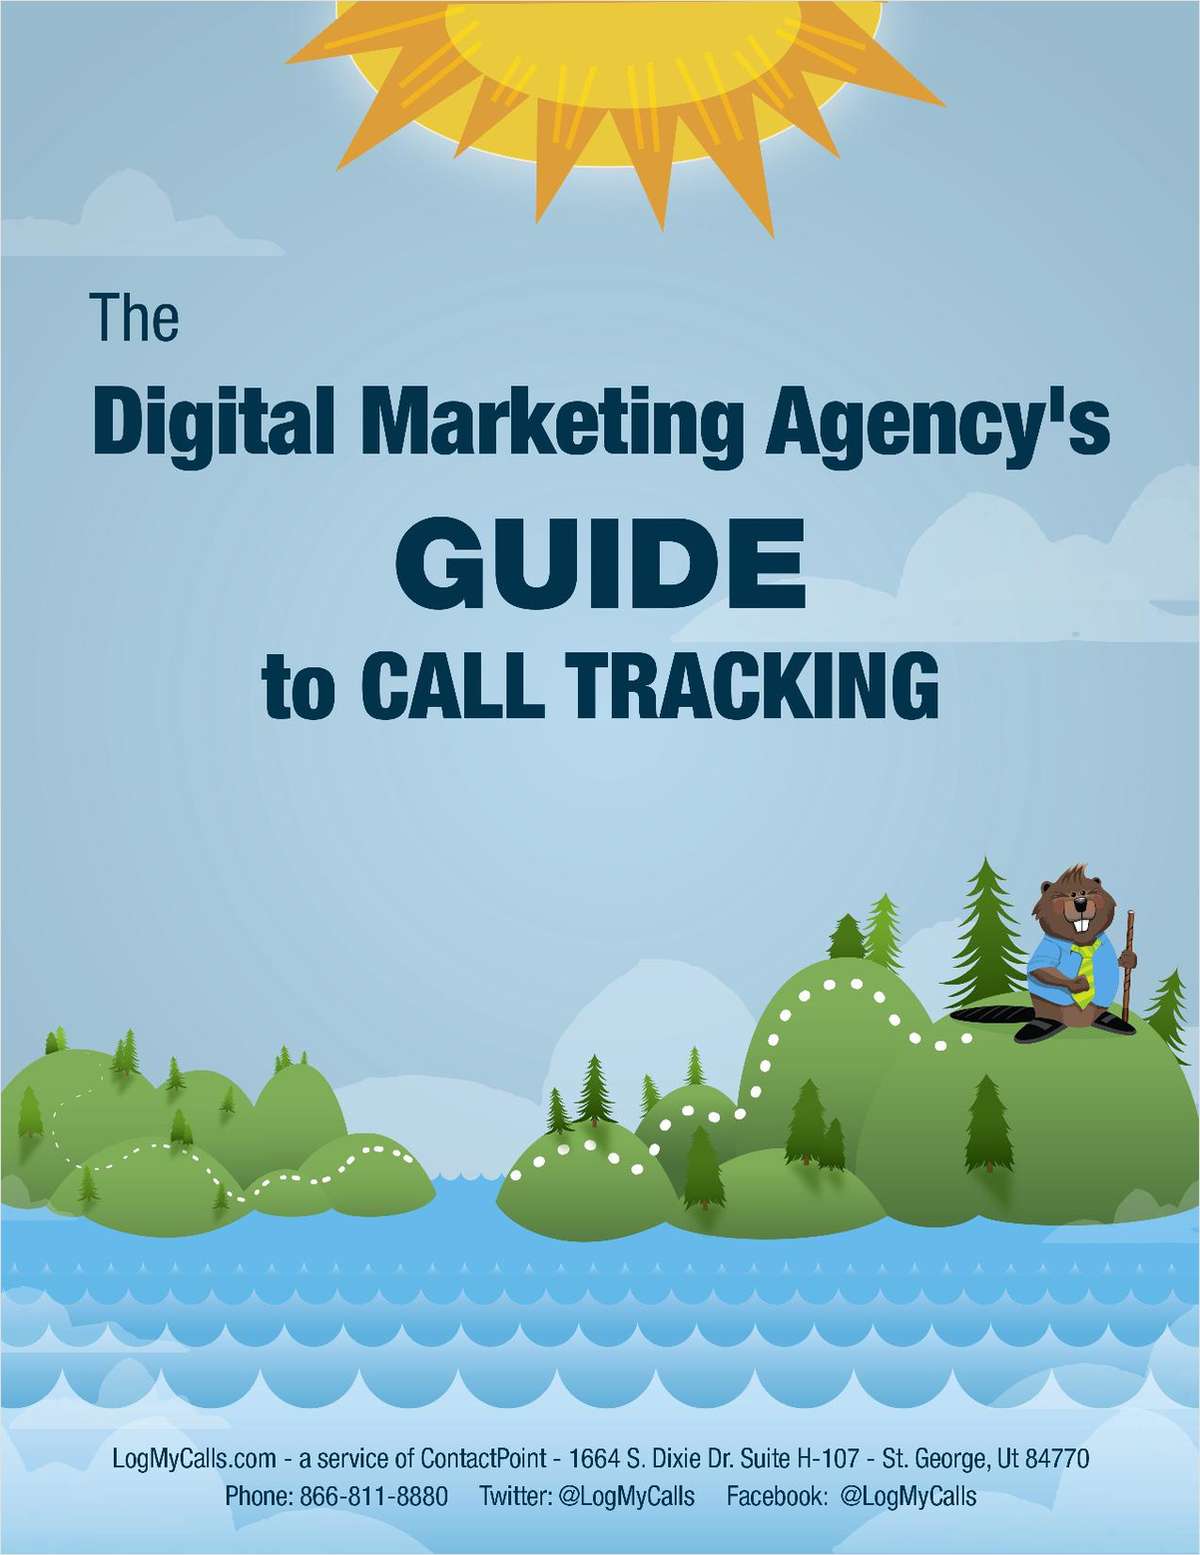 The Digital Marketing Agency's Guide to Call Tracking